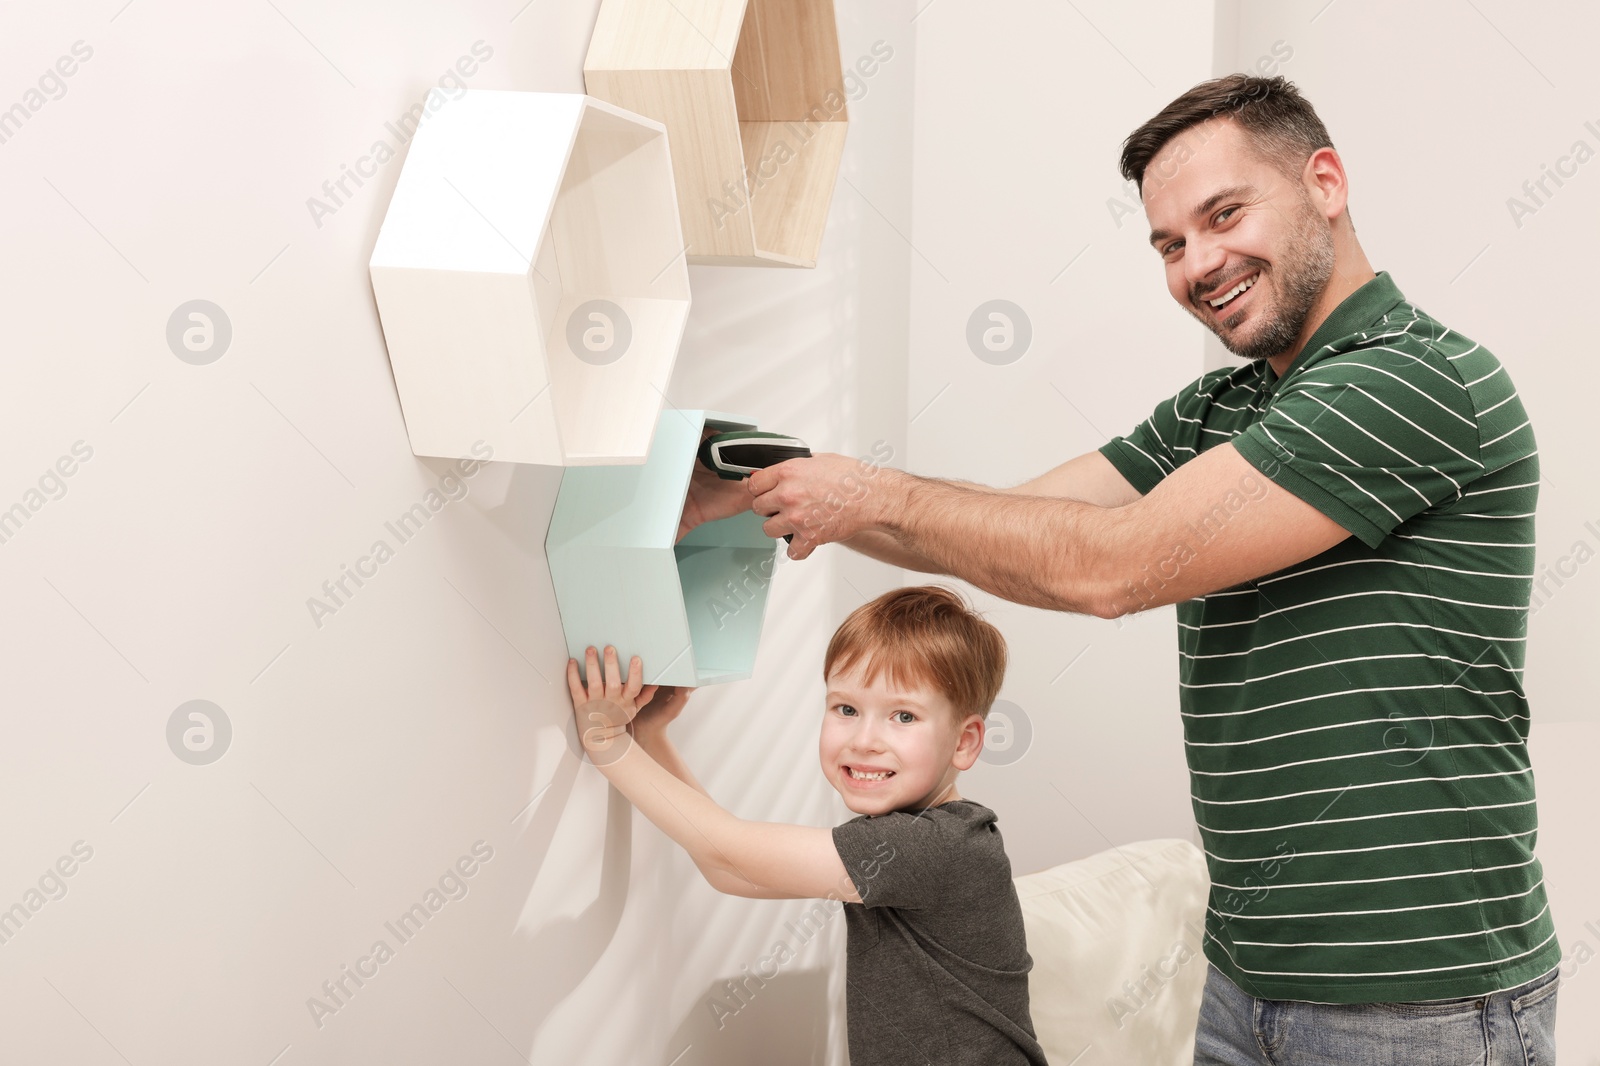 Photo of Father and son installing shelves on wall indoors. Repair work